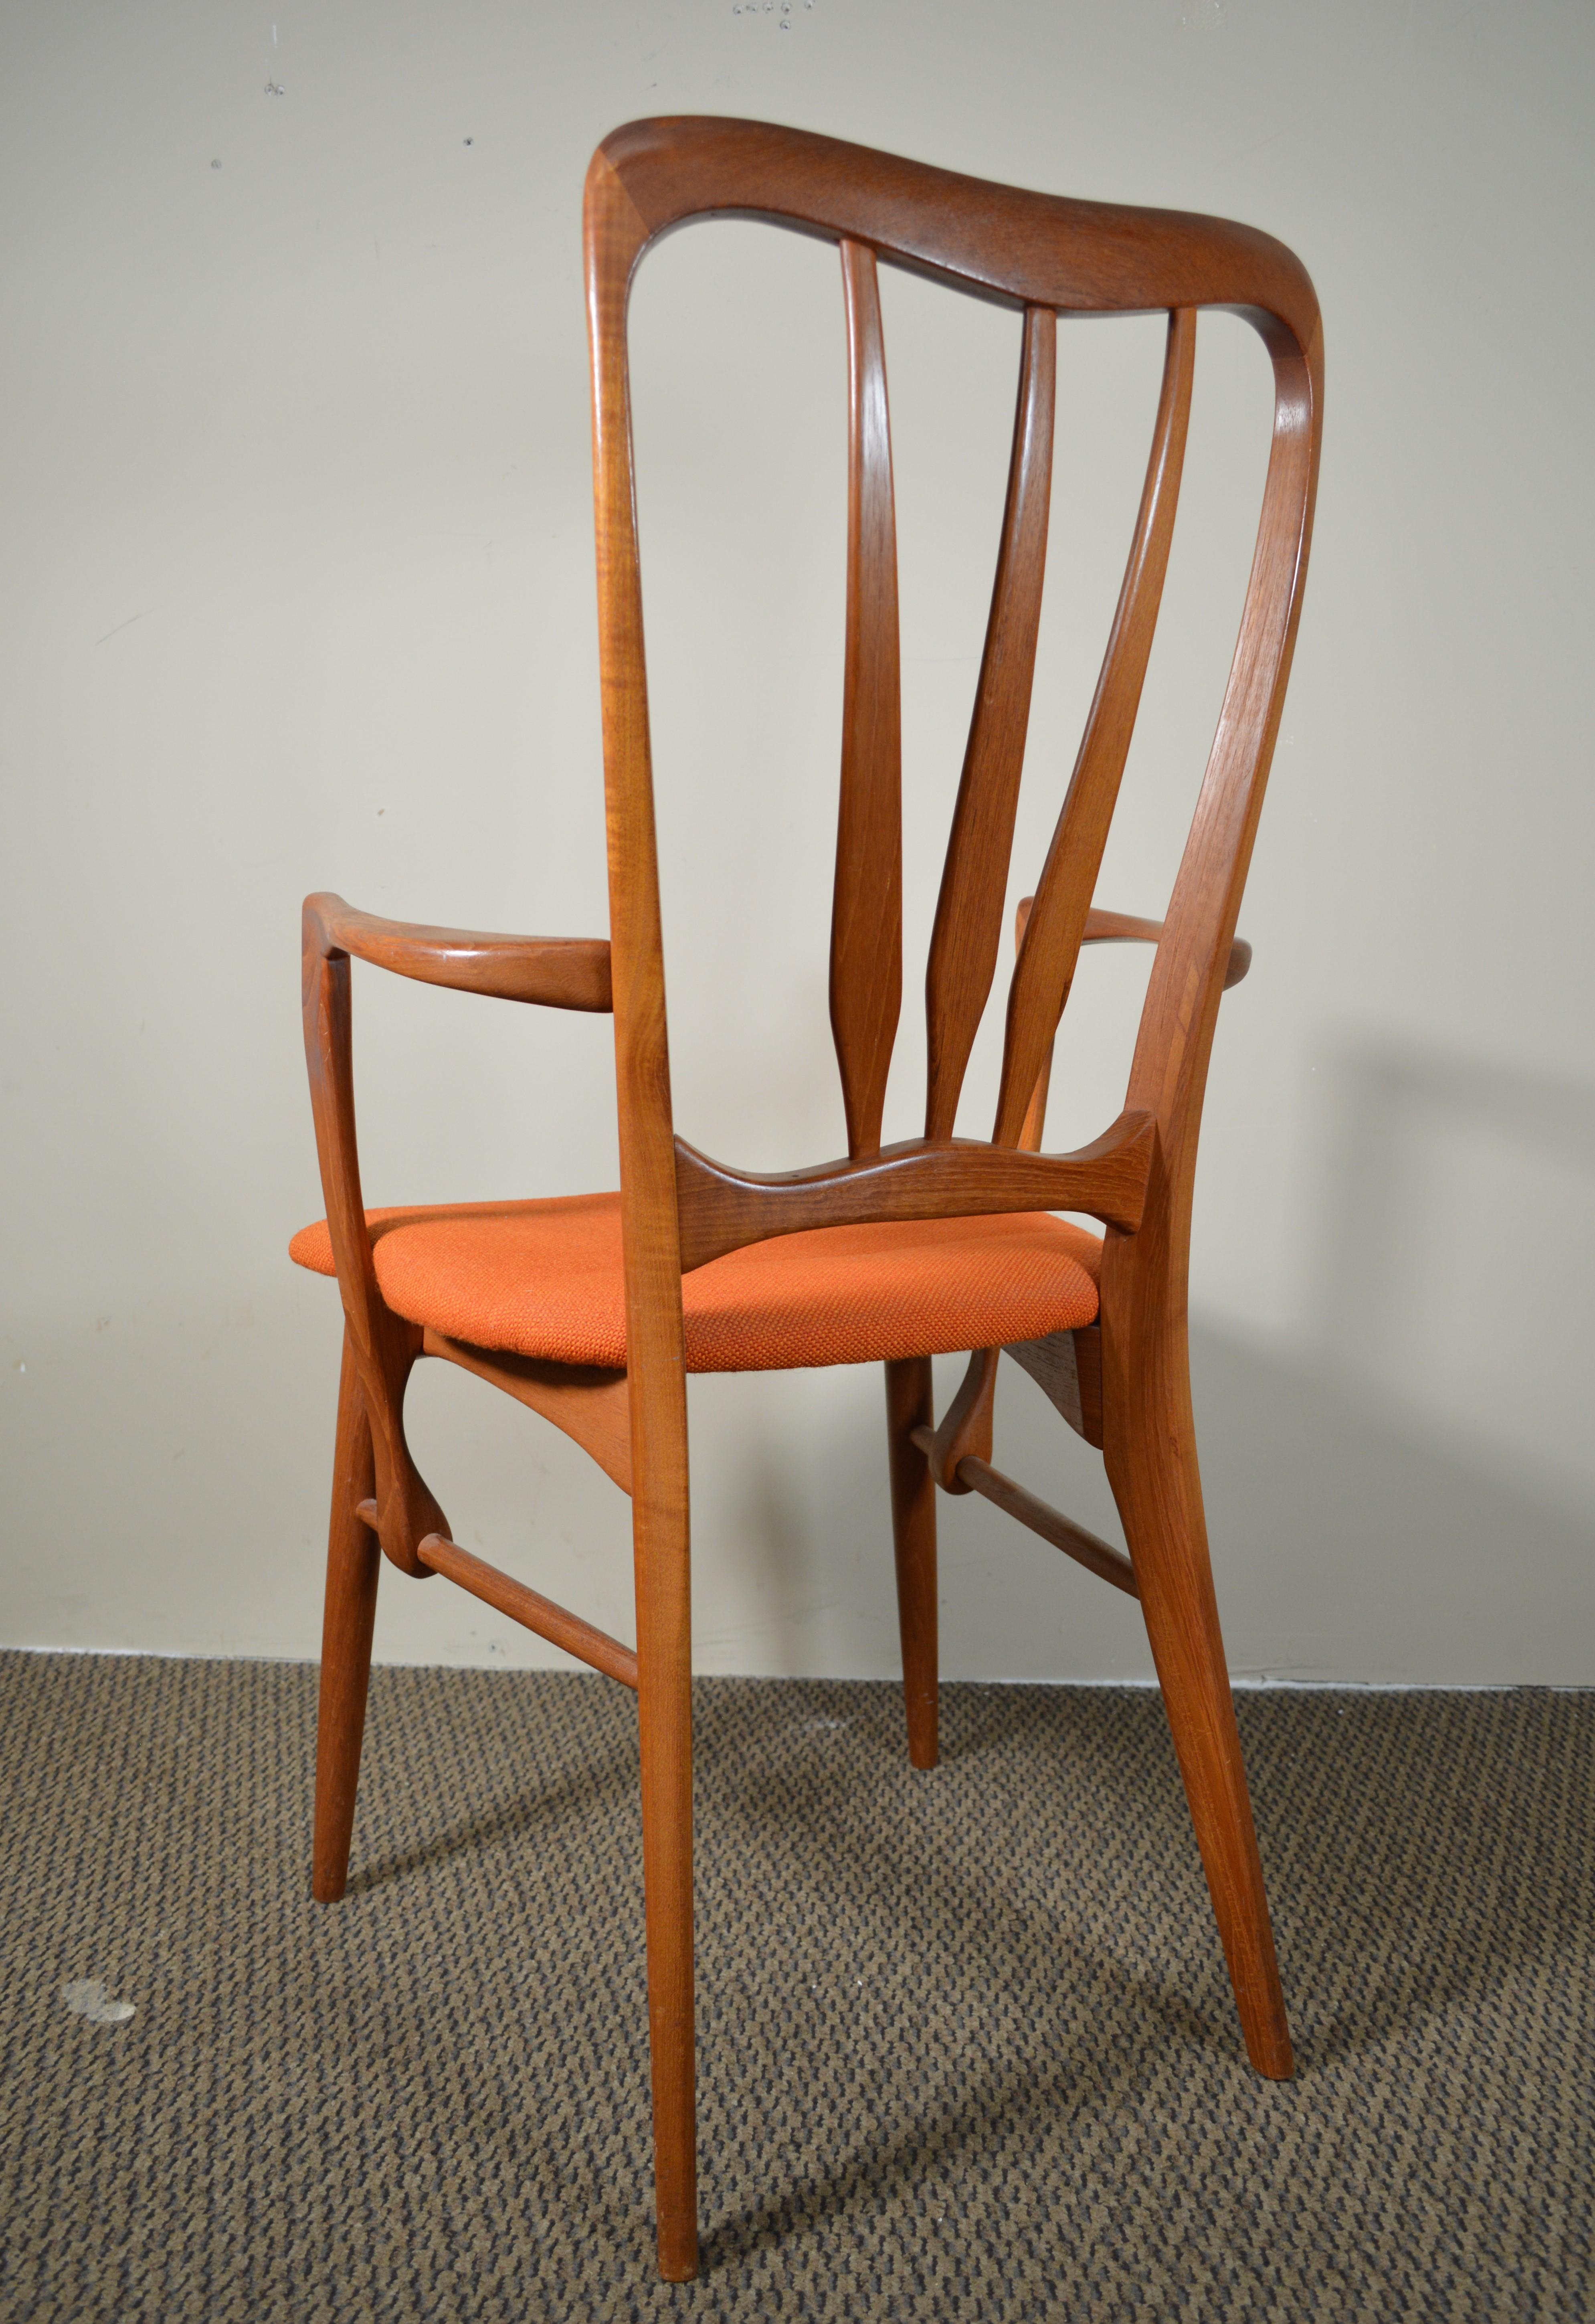 2 Midcentury Danish Modern Teak Dining Ingrid Chairs by Koefoeds Hornslet In Good Condition For Sale In Norcross, GA